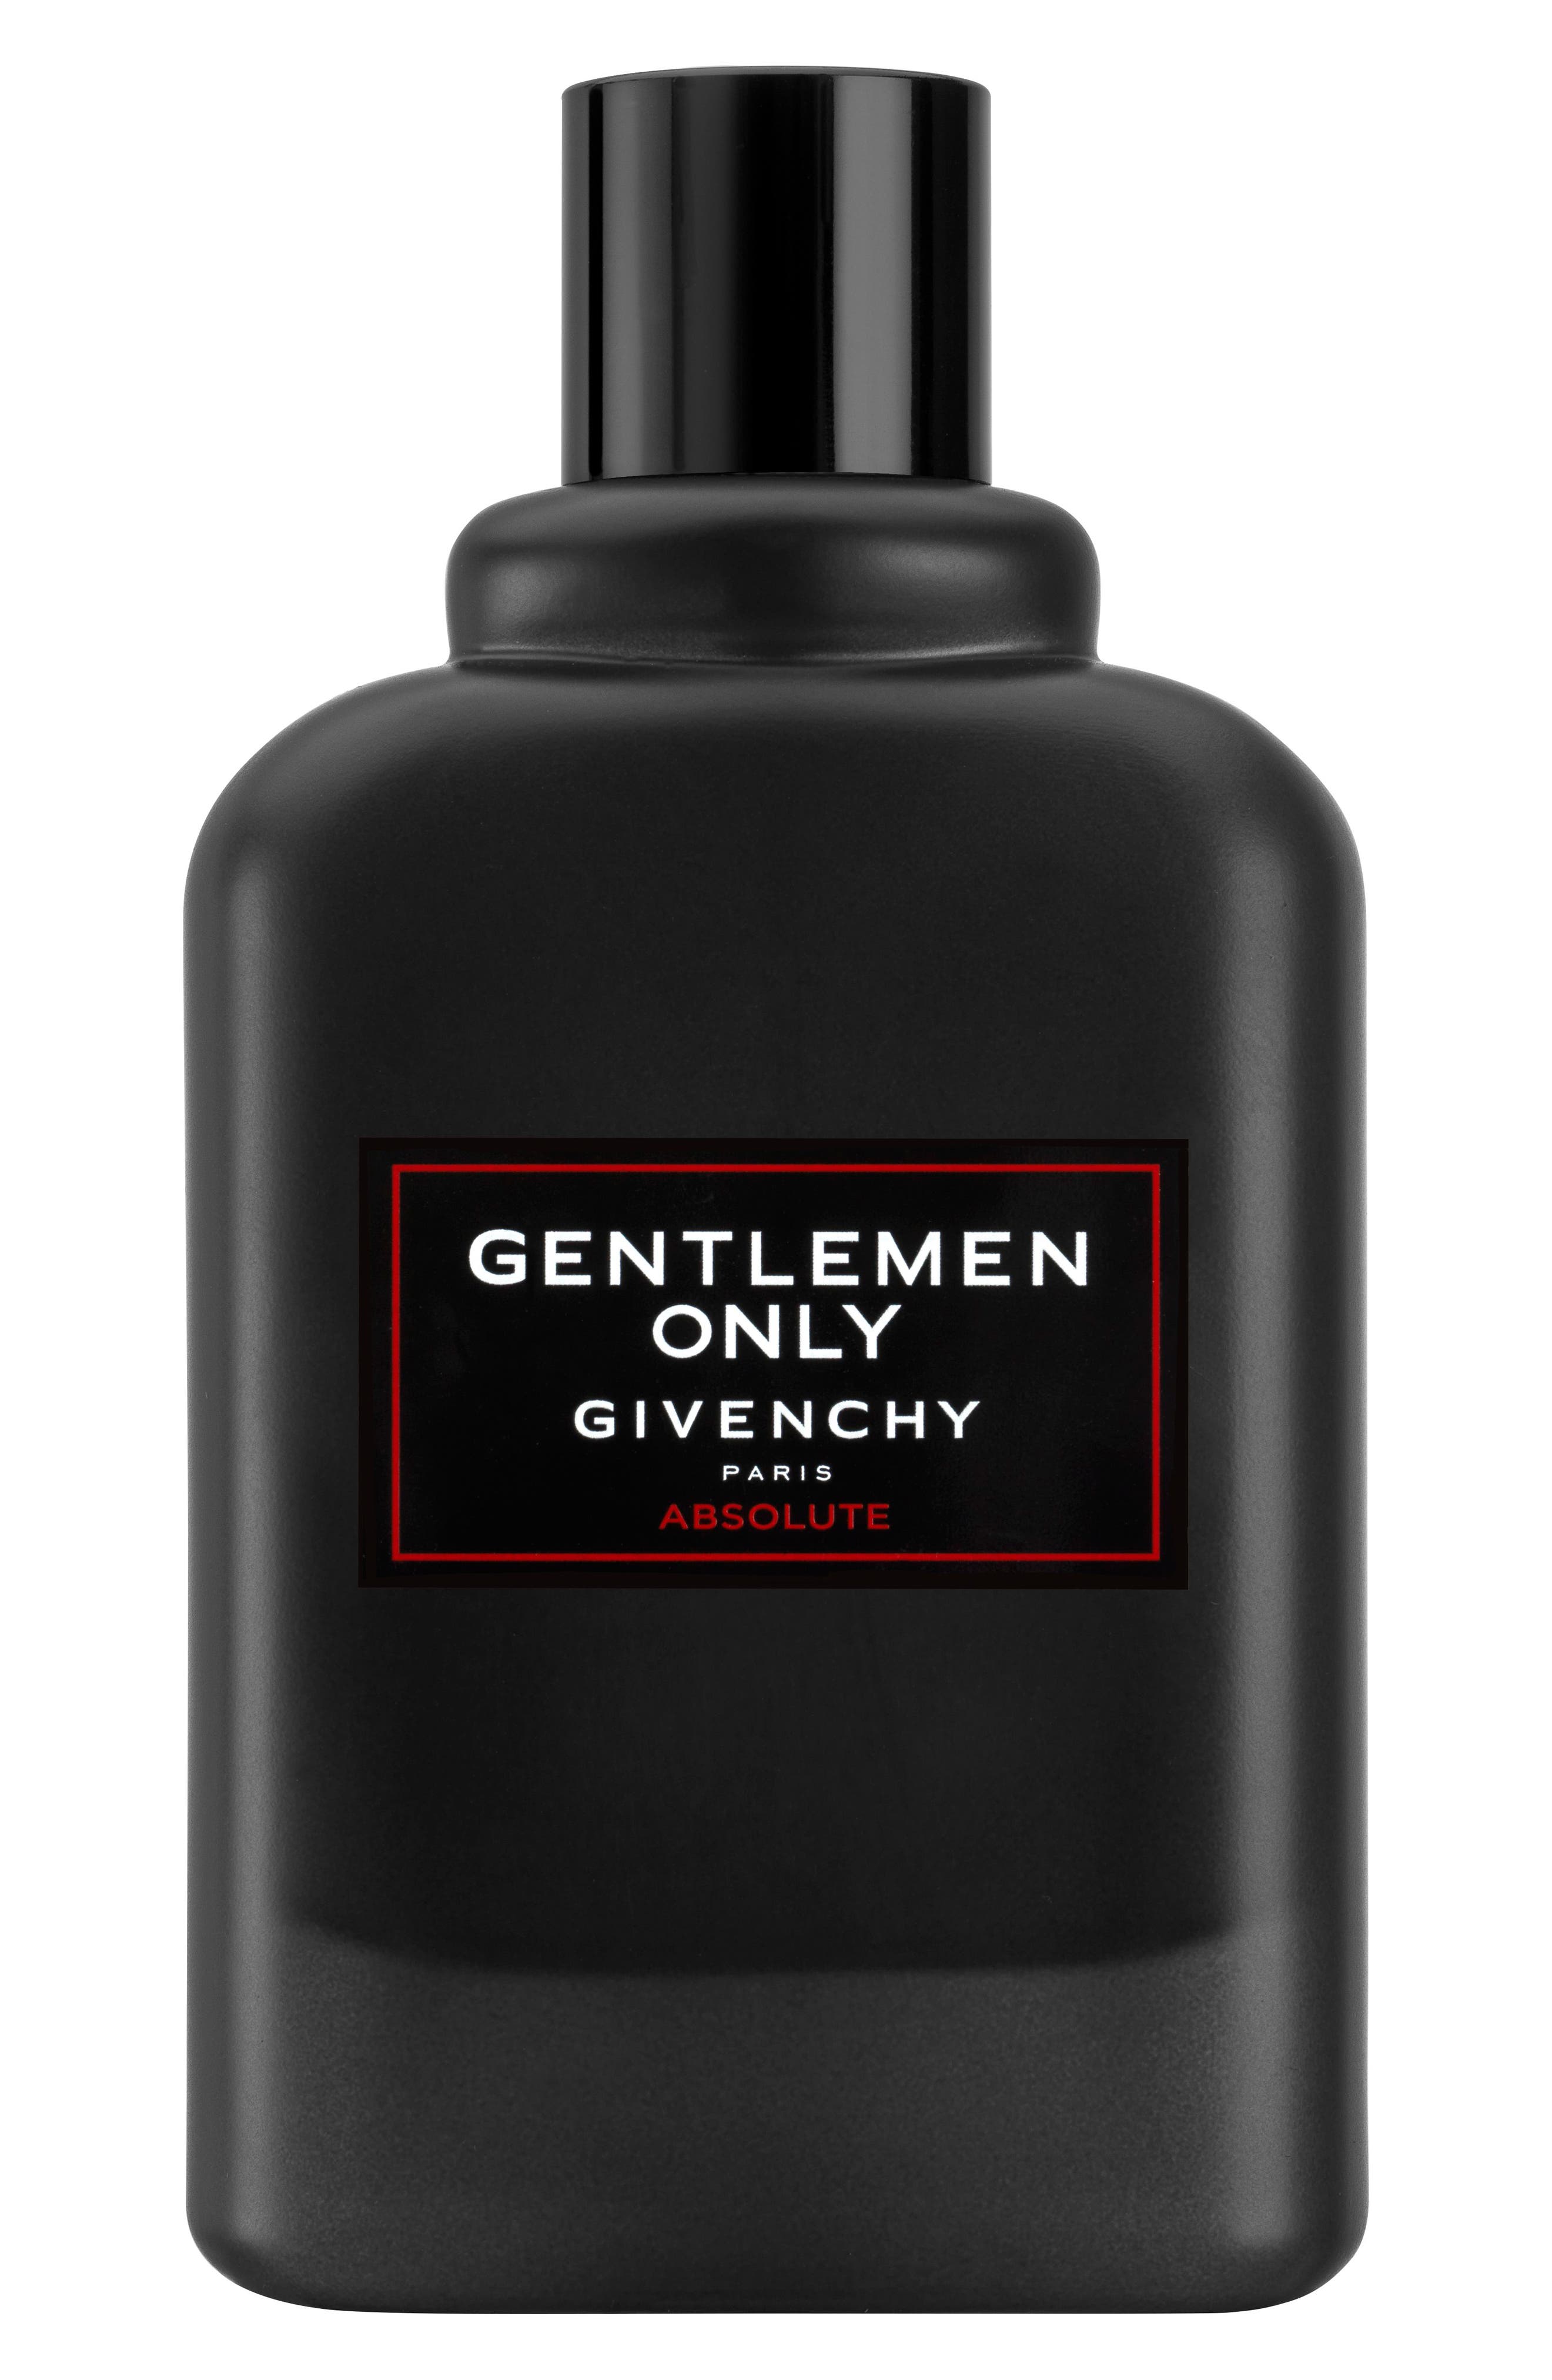 givenchy gentlemen only paris